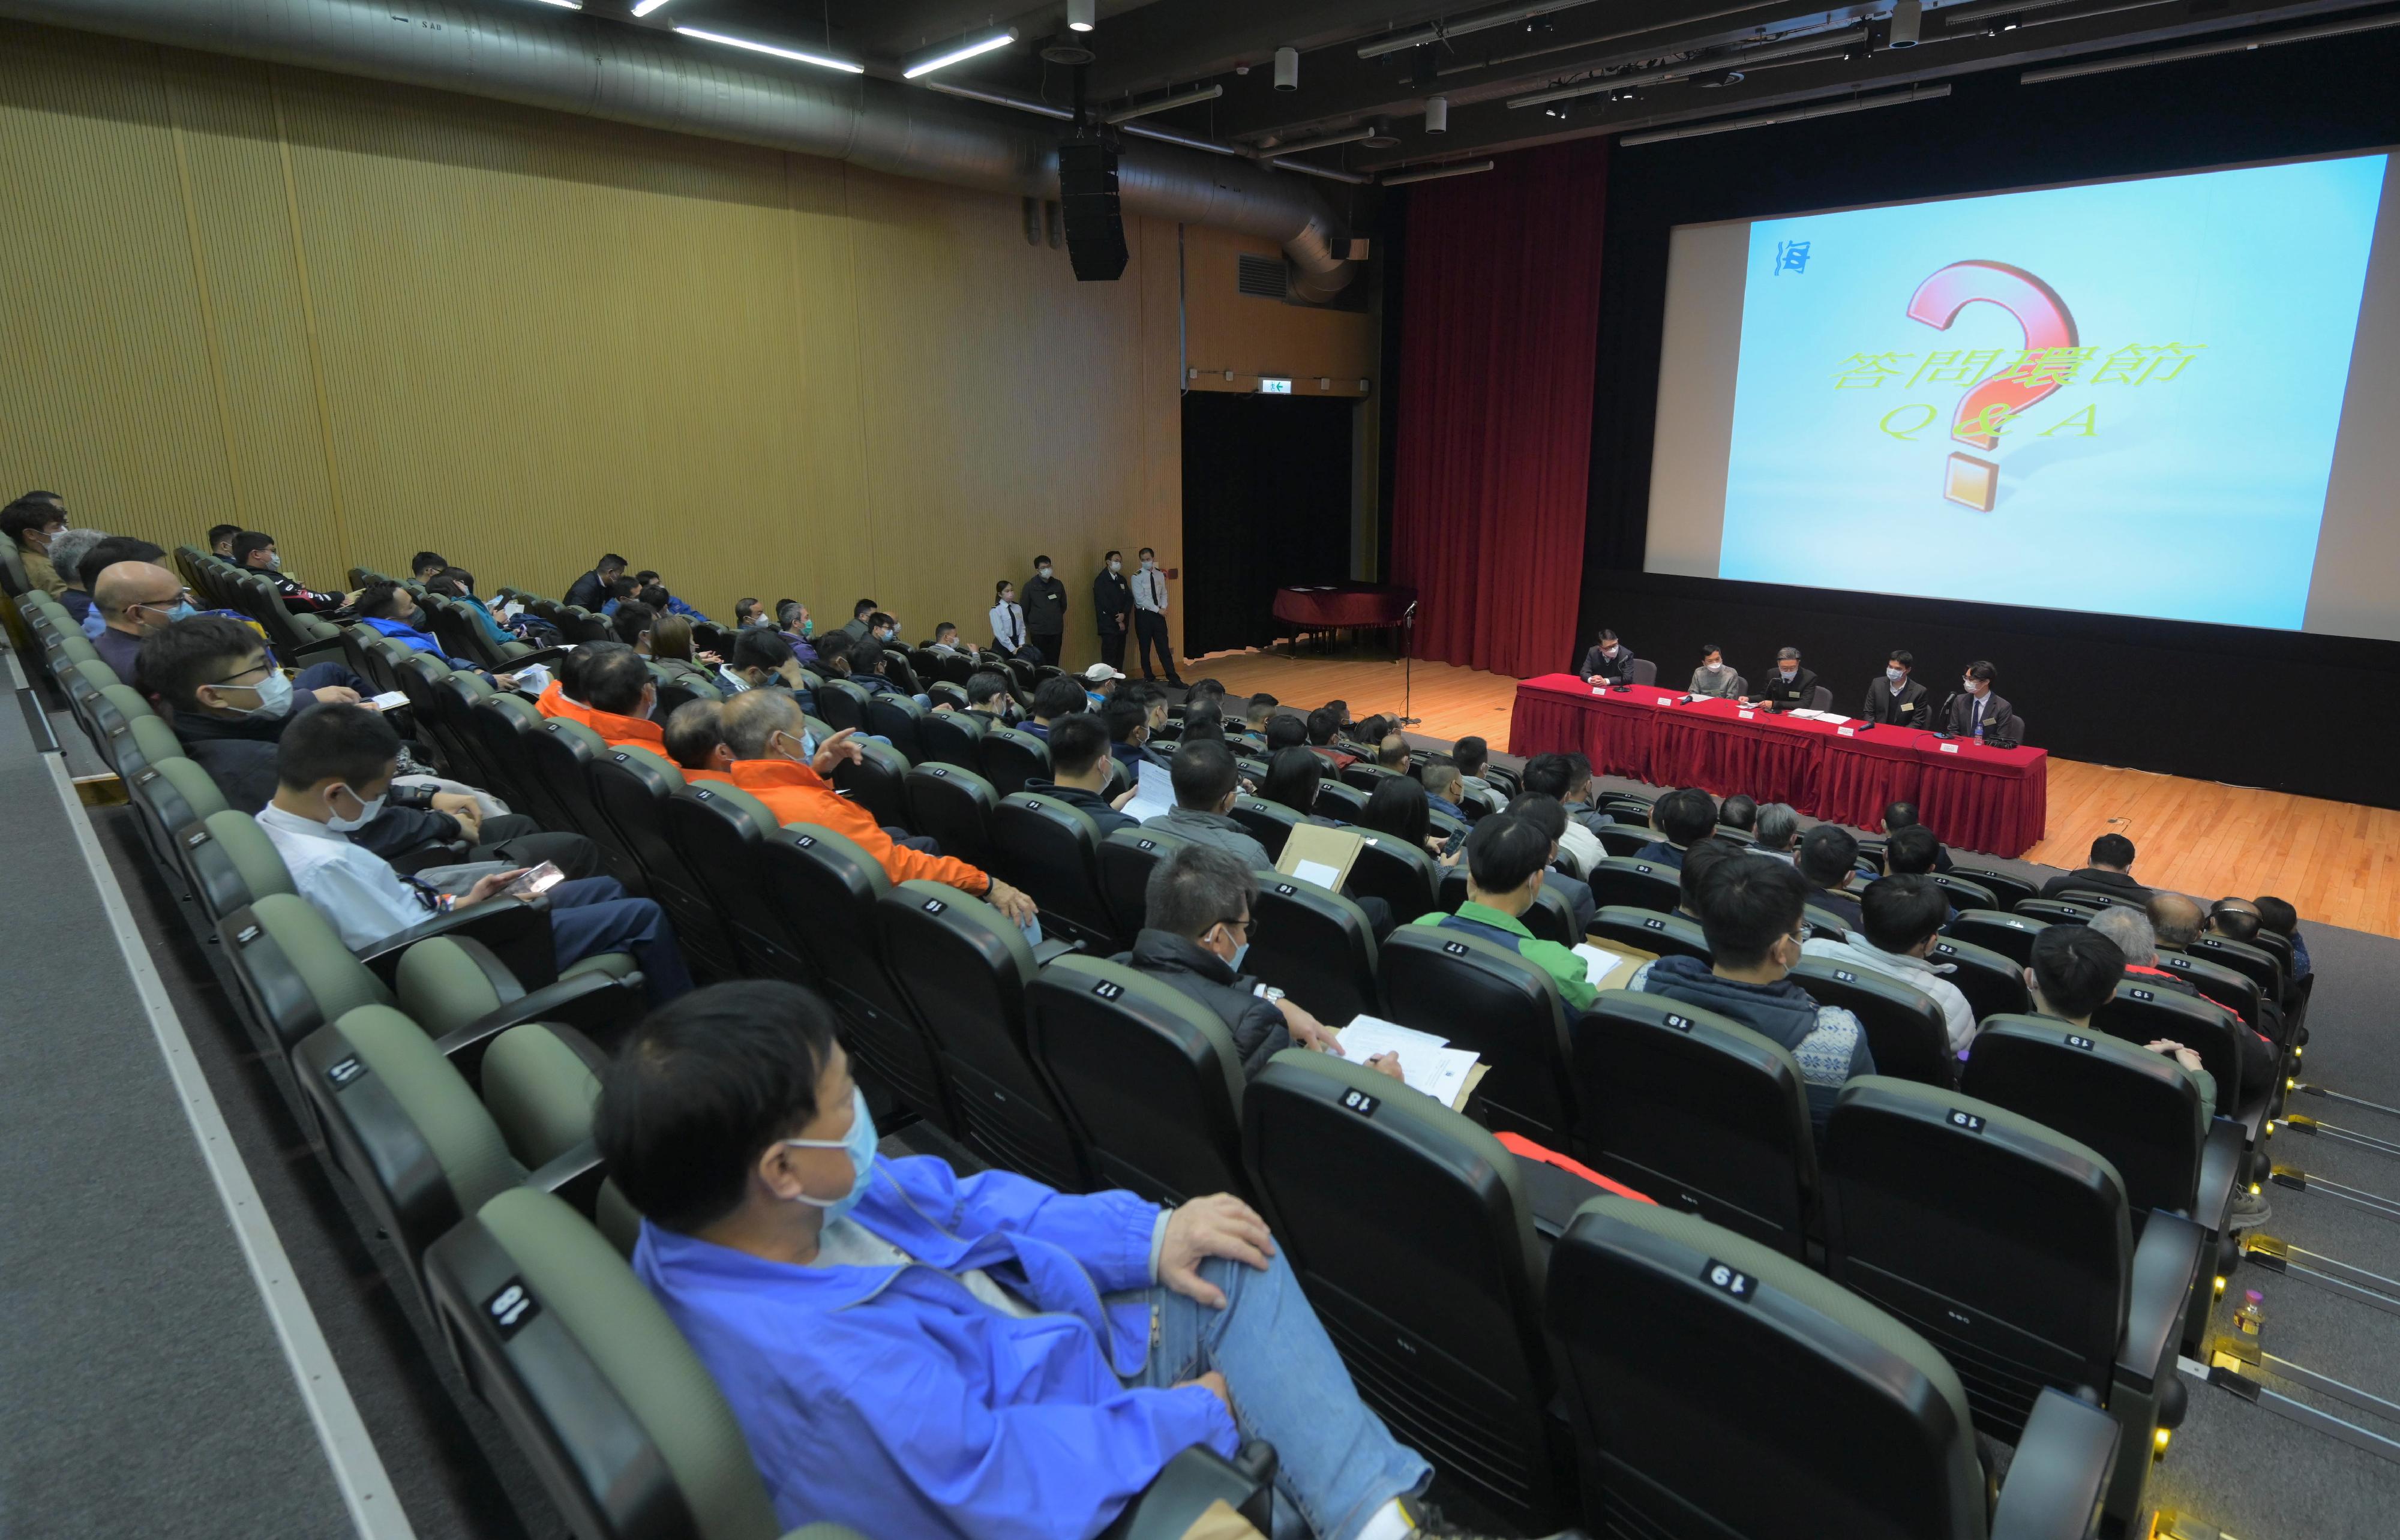 The Navigational Safety Seminar 2023 held today (January 17) was attended by about 160 representatives from the shipping industries, coxswains and operators of local vessels, and representatives of marine works projects.
